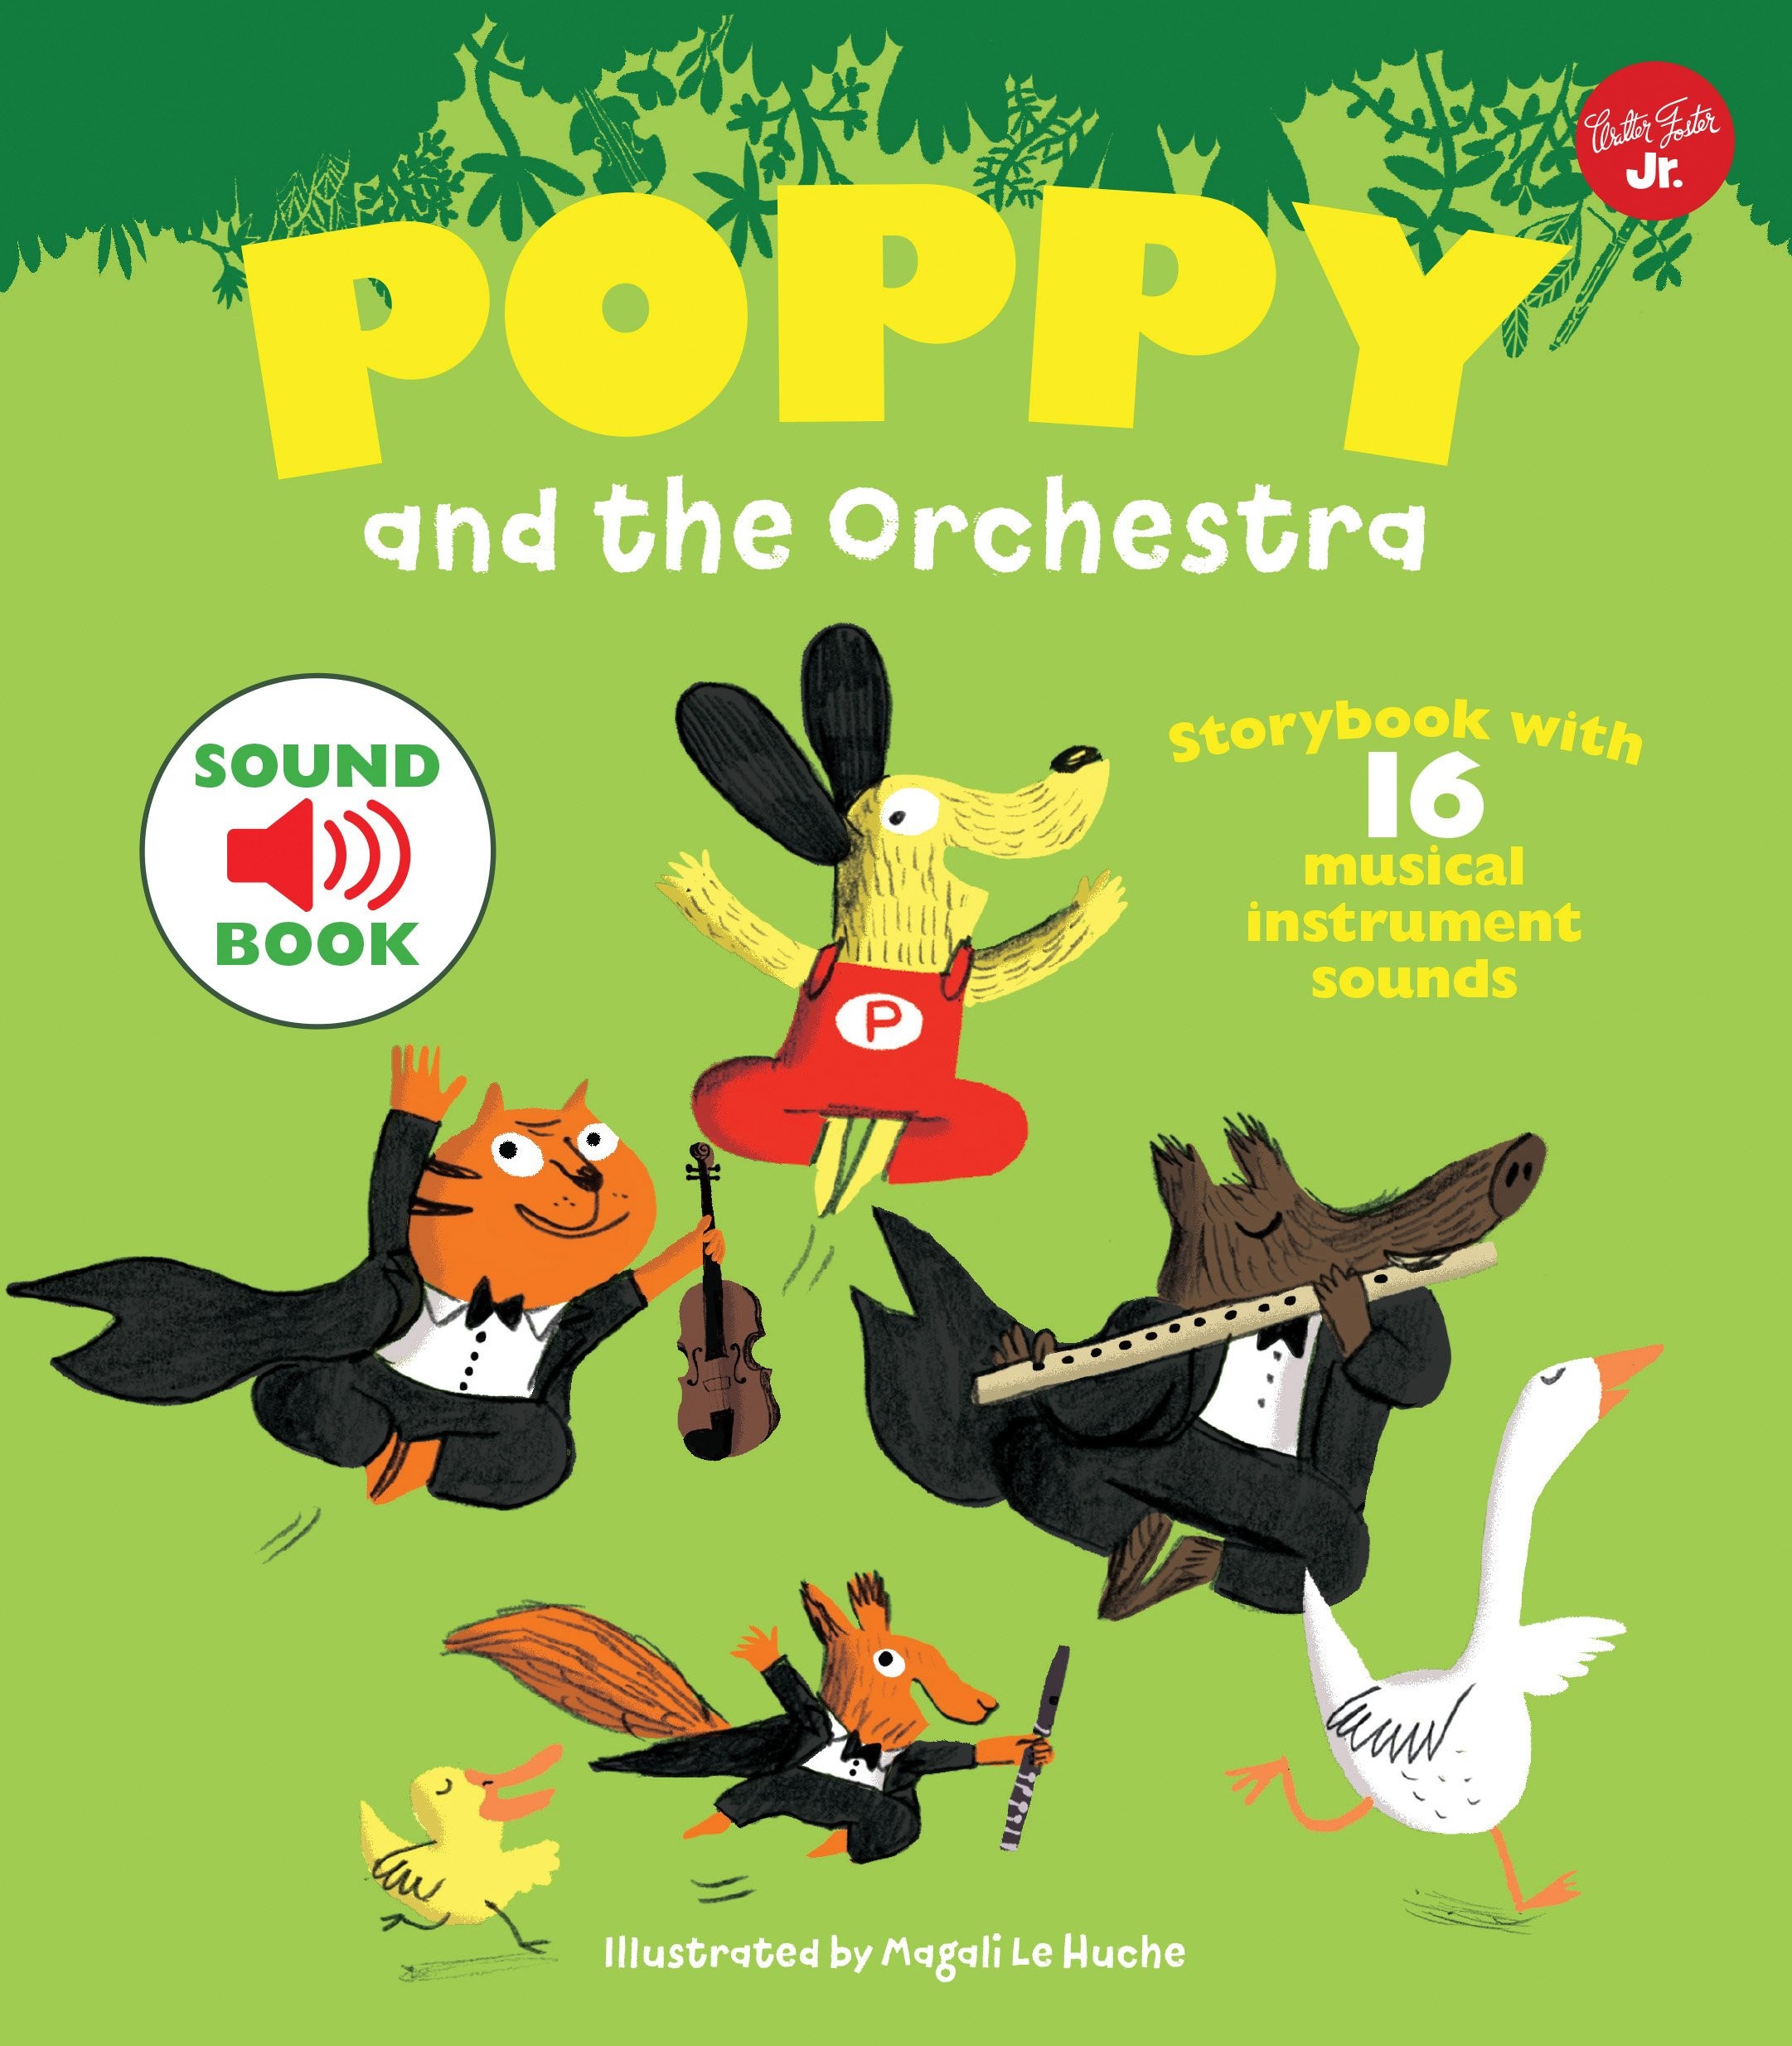 Poppy and the Orchestra : With 16 musical instrument sounds!